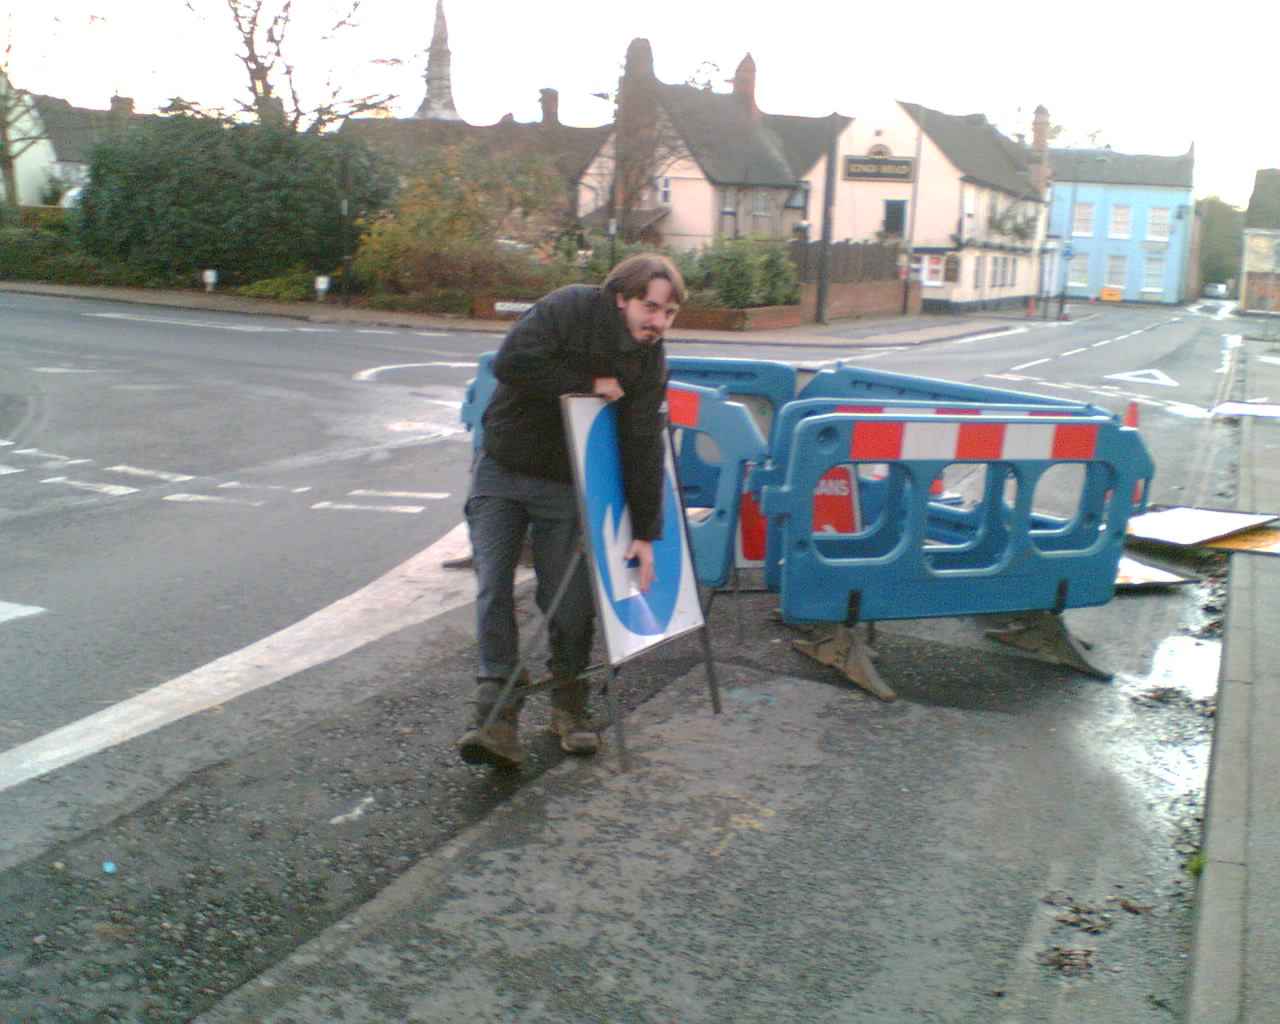 Phil with a road sign